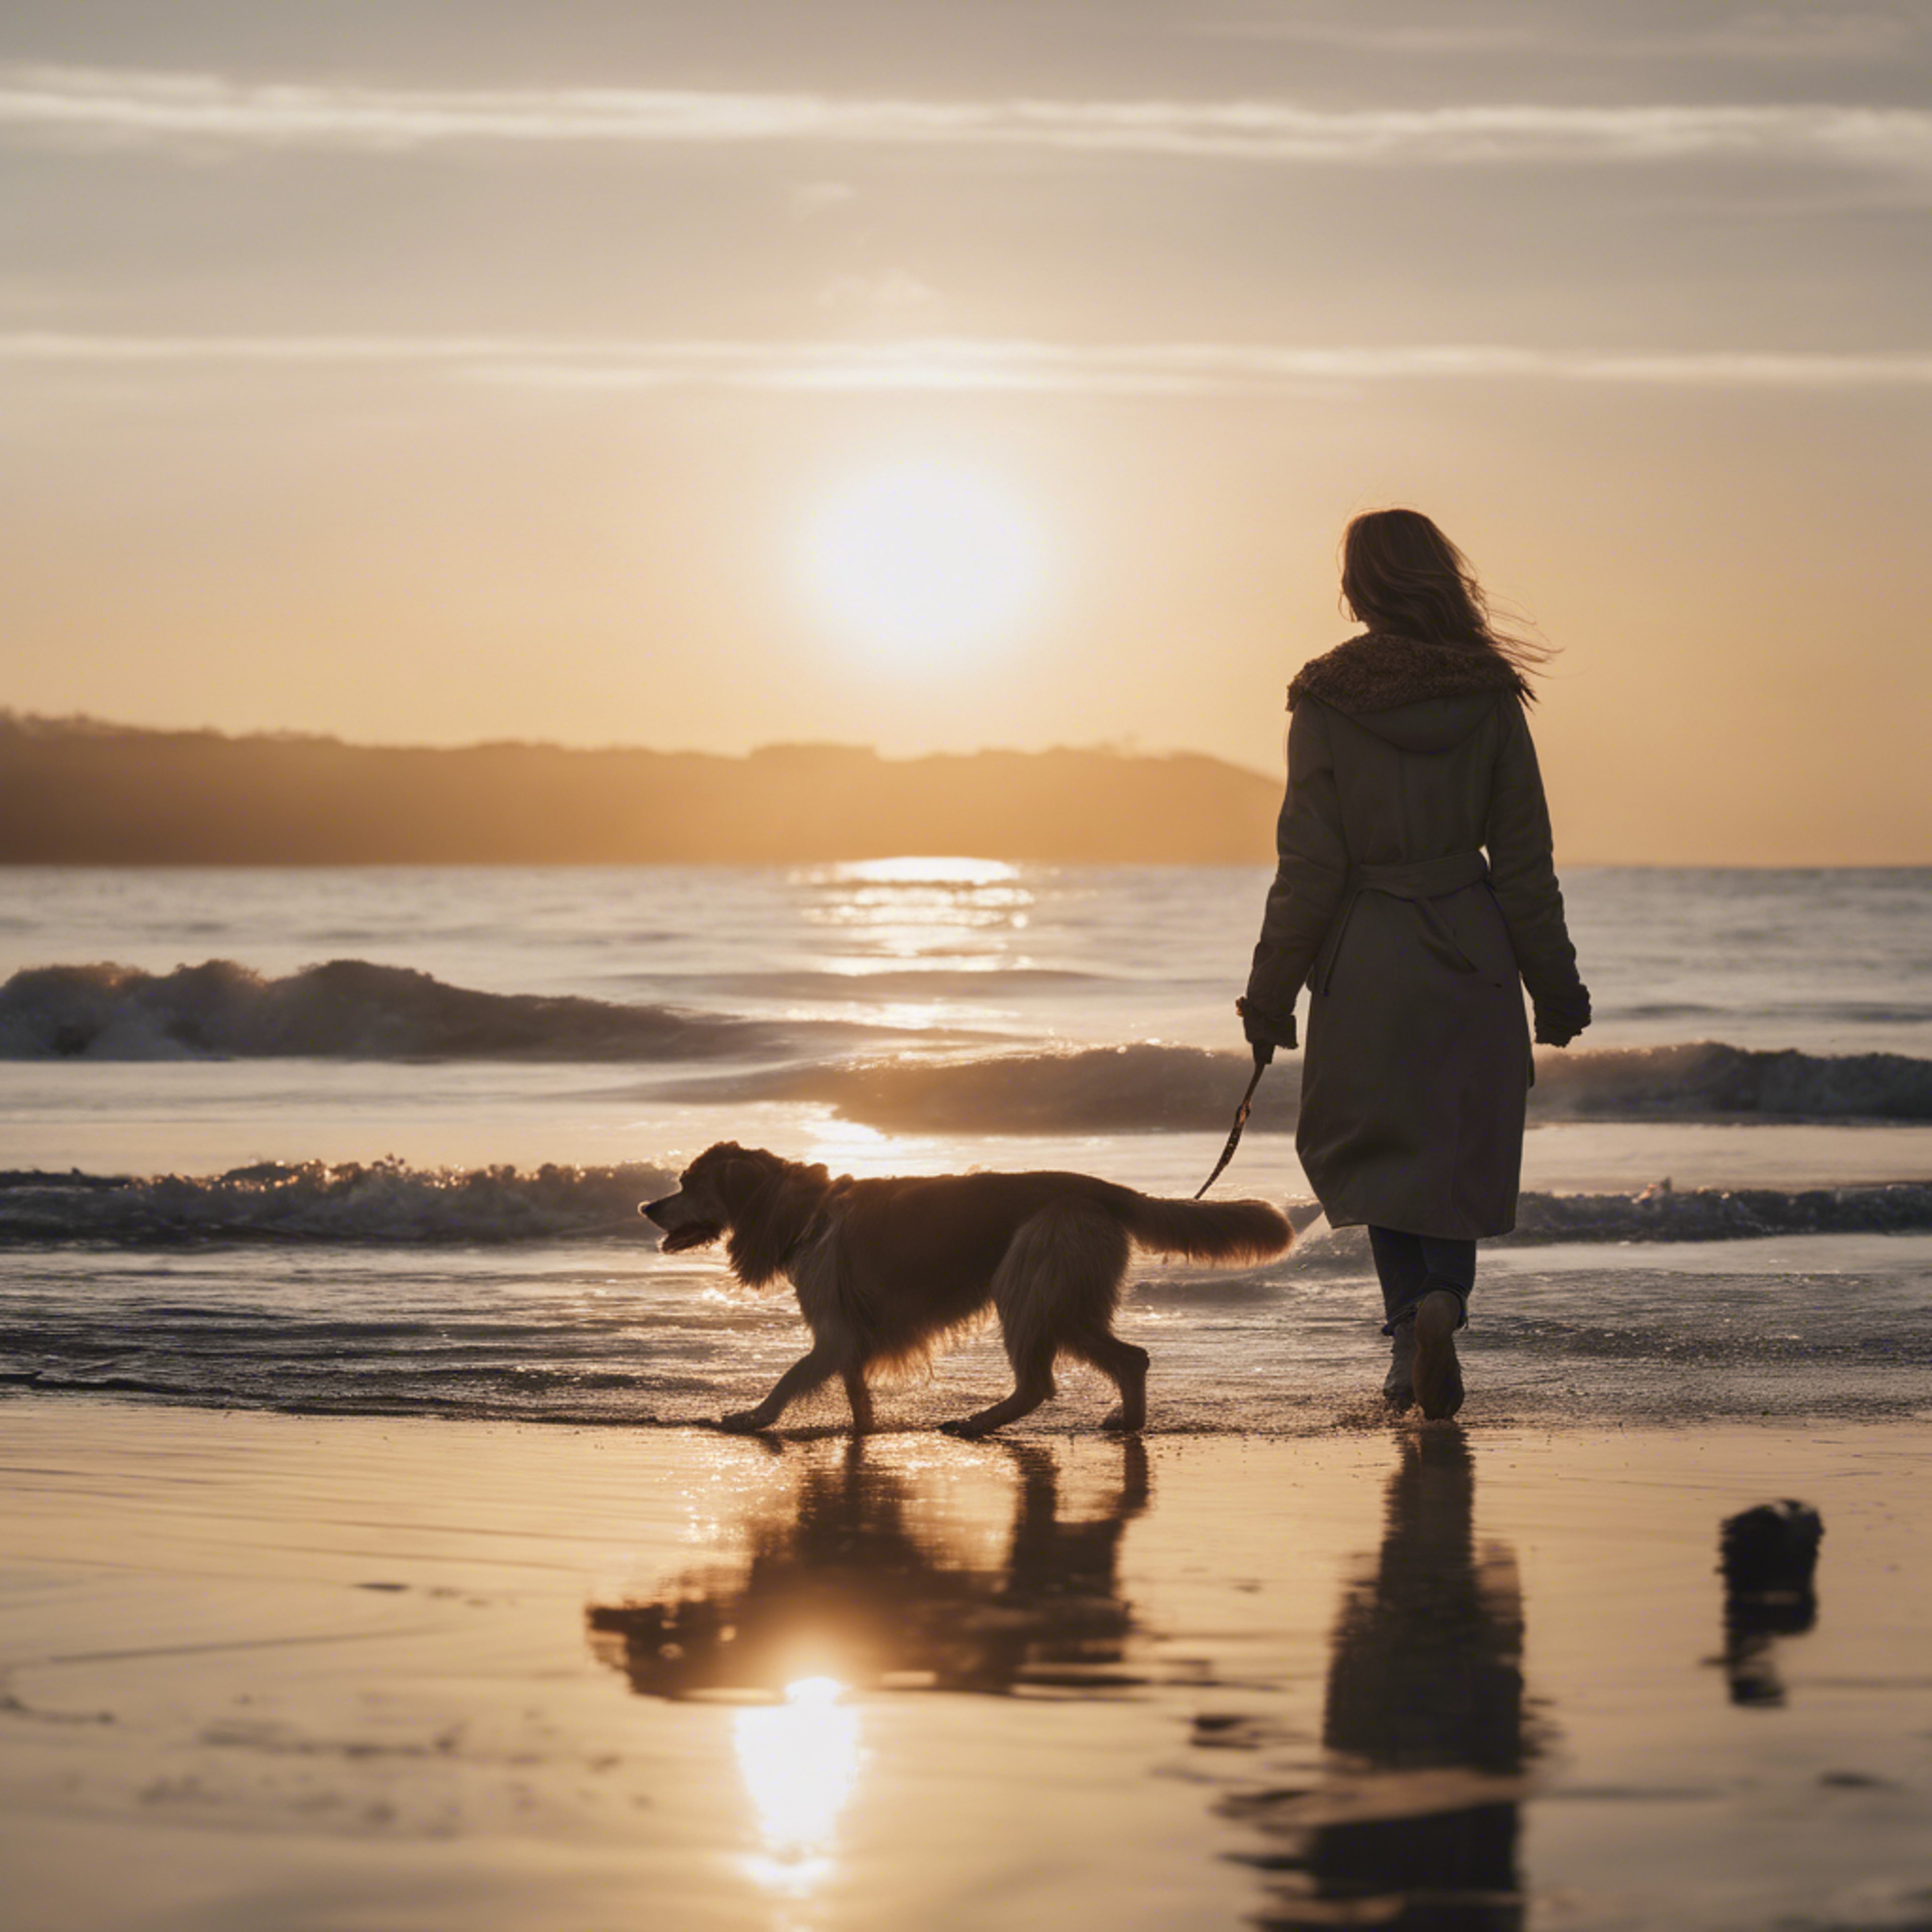 A beach scene with a woman walking her enthusiastic dog along the water's edge at sunset. Tapet[f9bc2ab3990f4caba062]